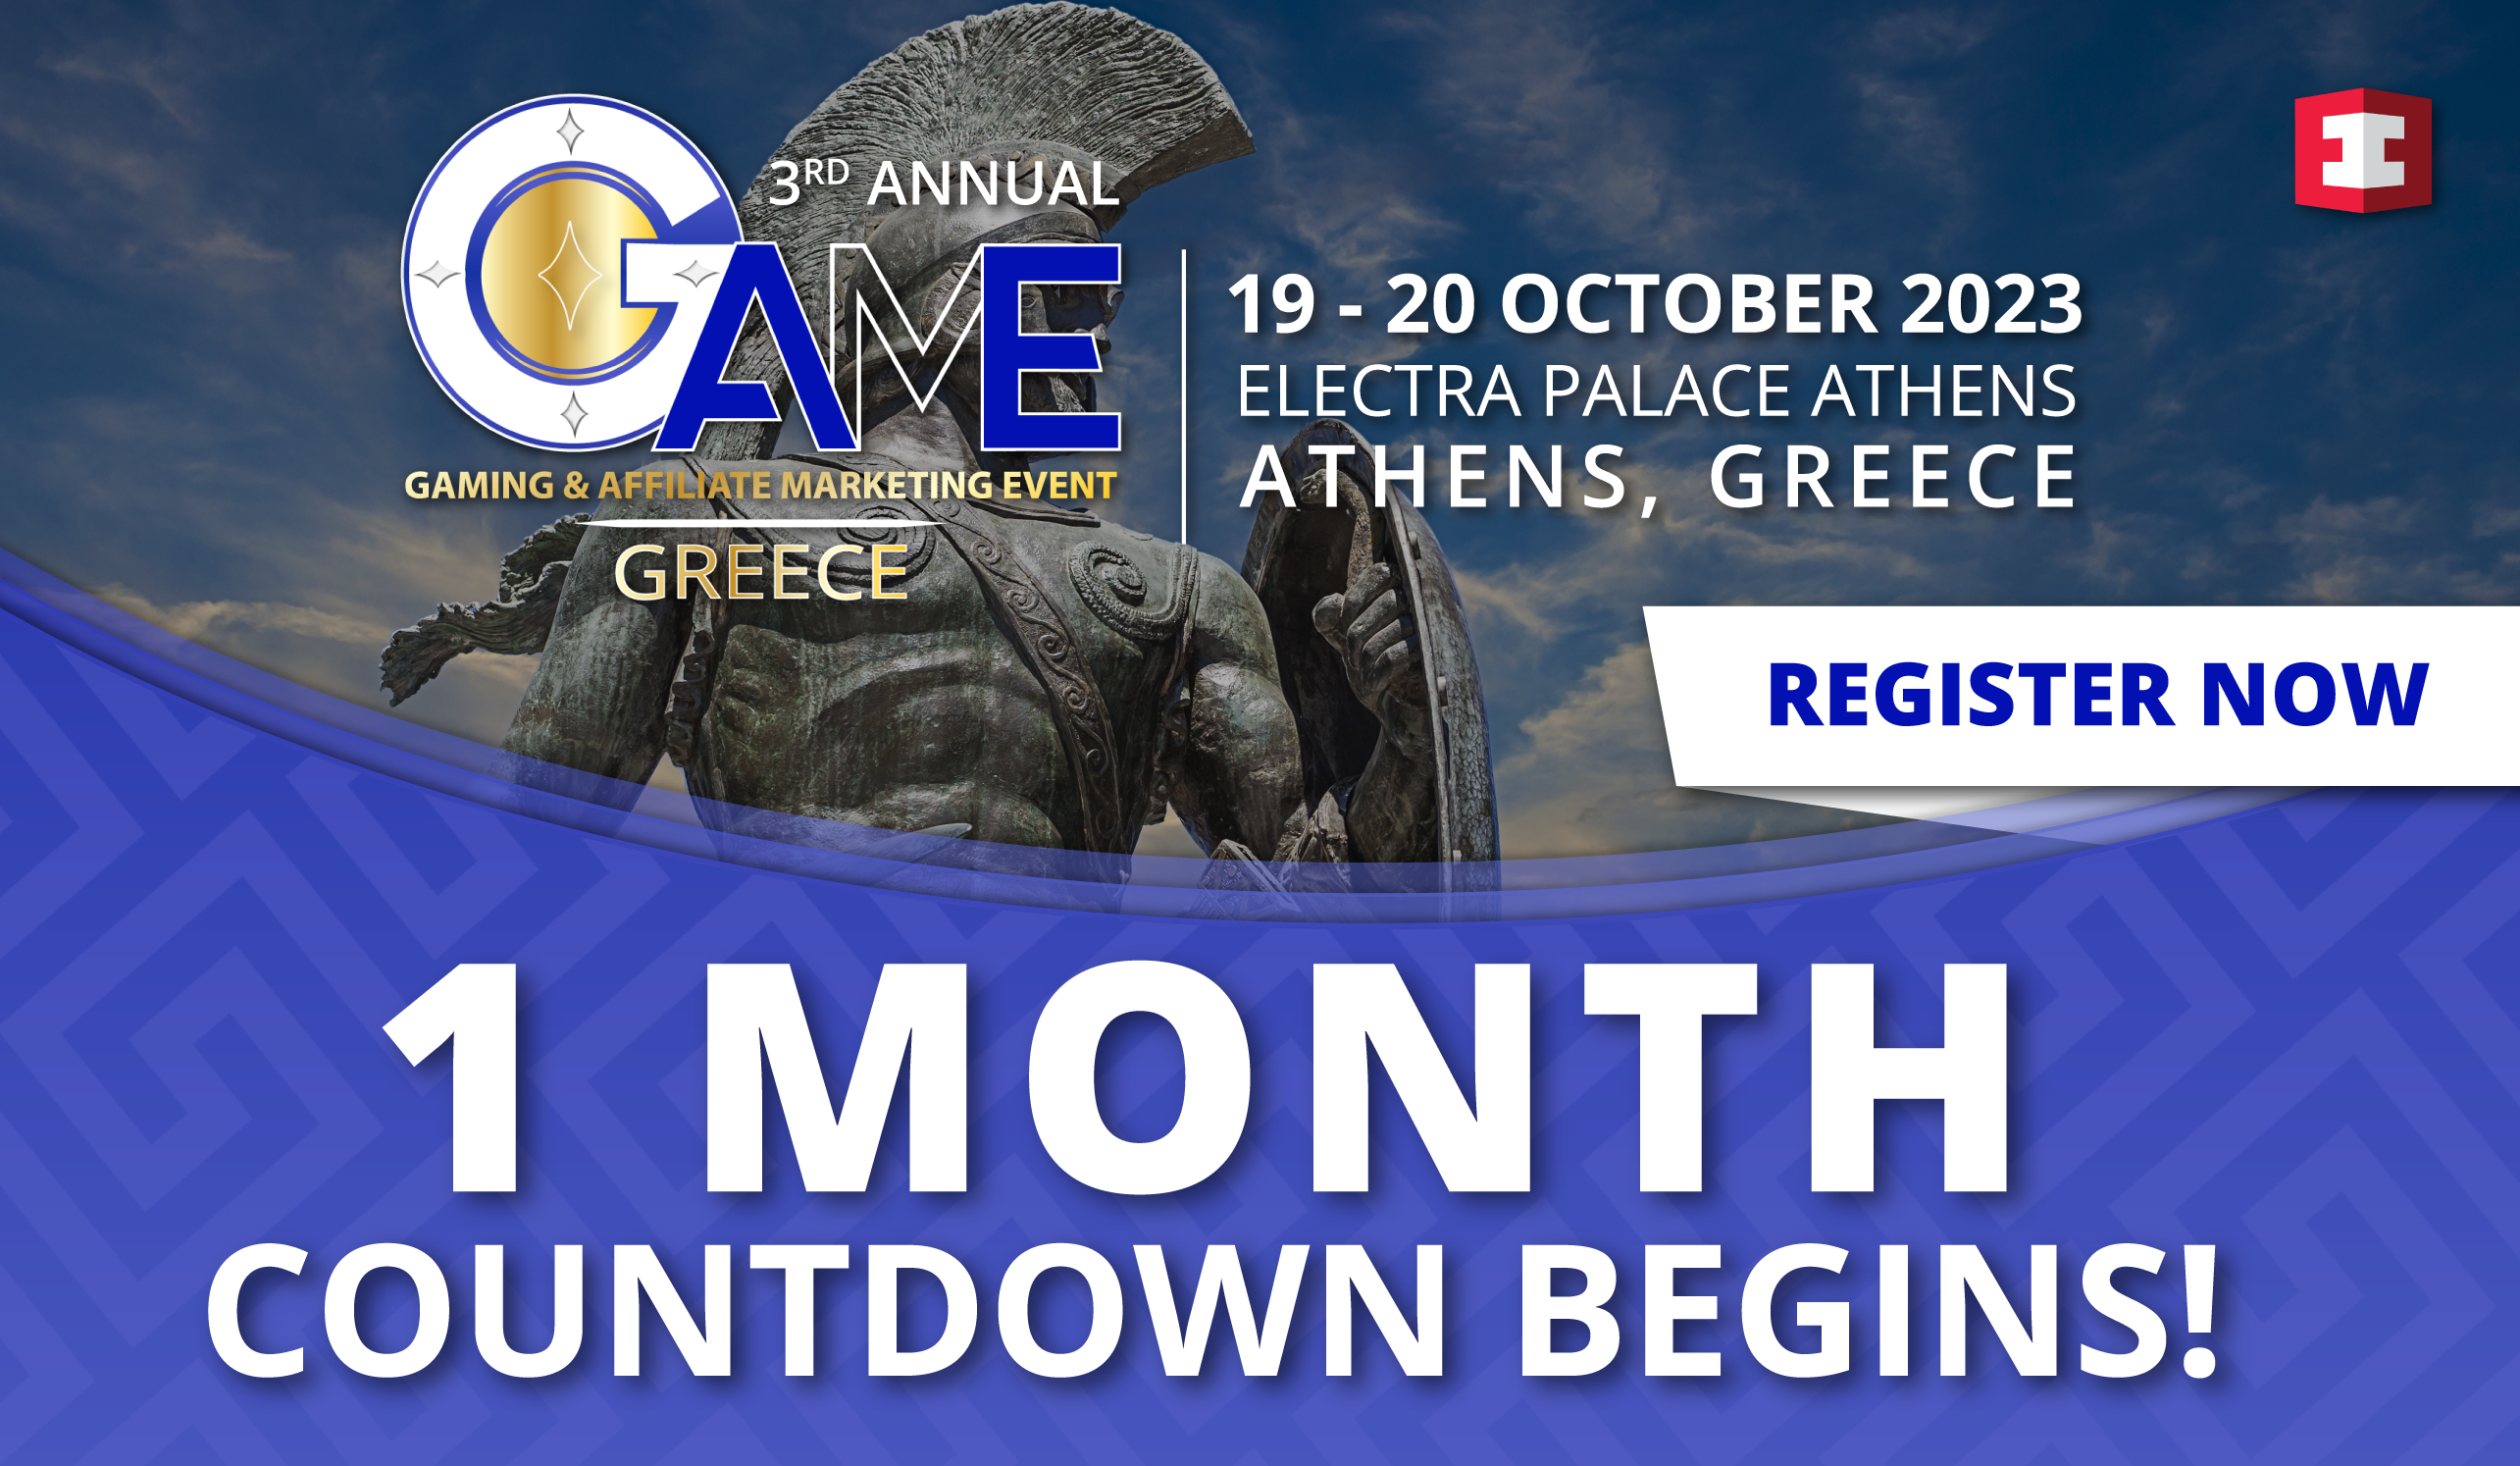 Emerging Growth and Prospects in the Greek iGaming Market